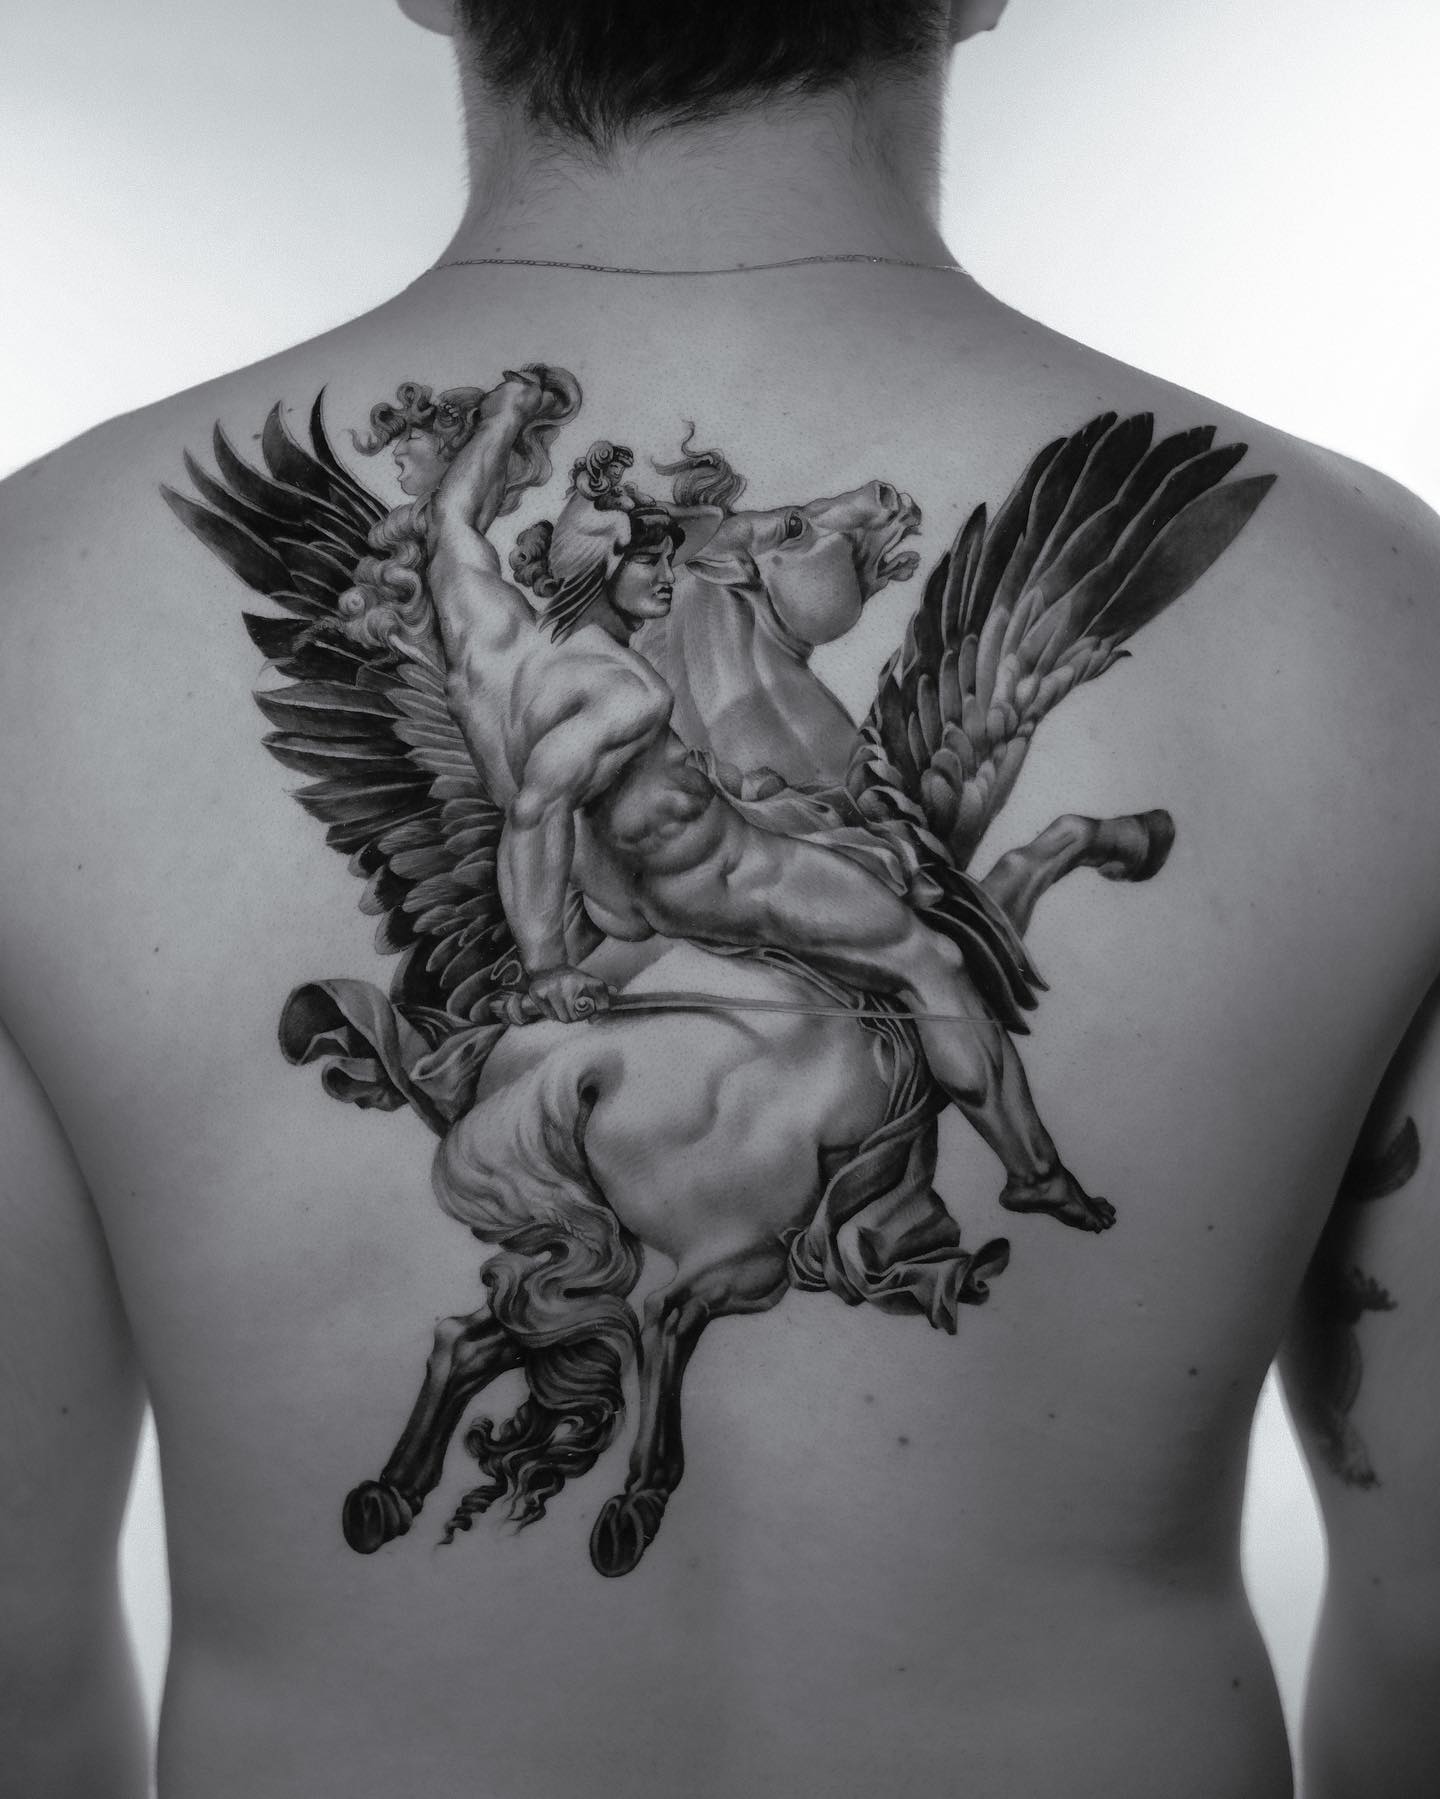 Pegasus tattoo by DanaScully on DeviantArt